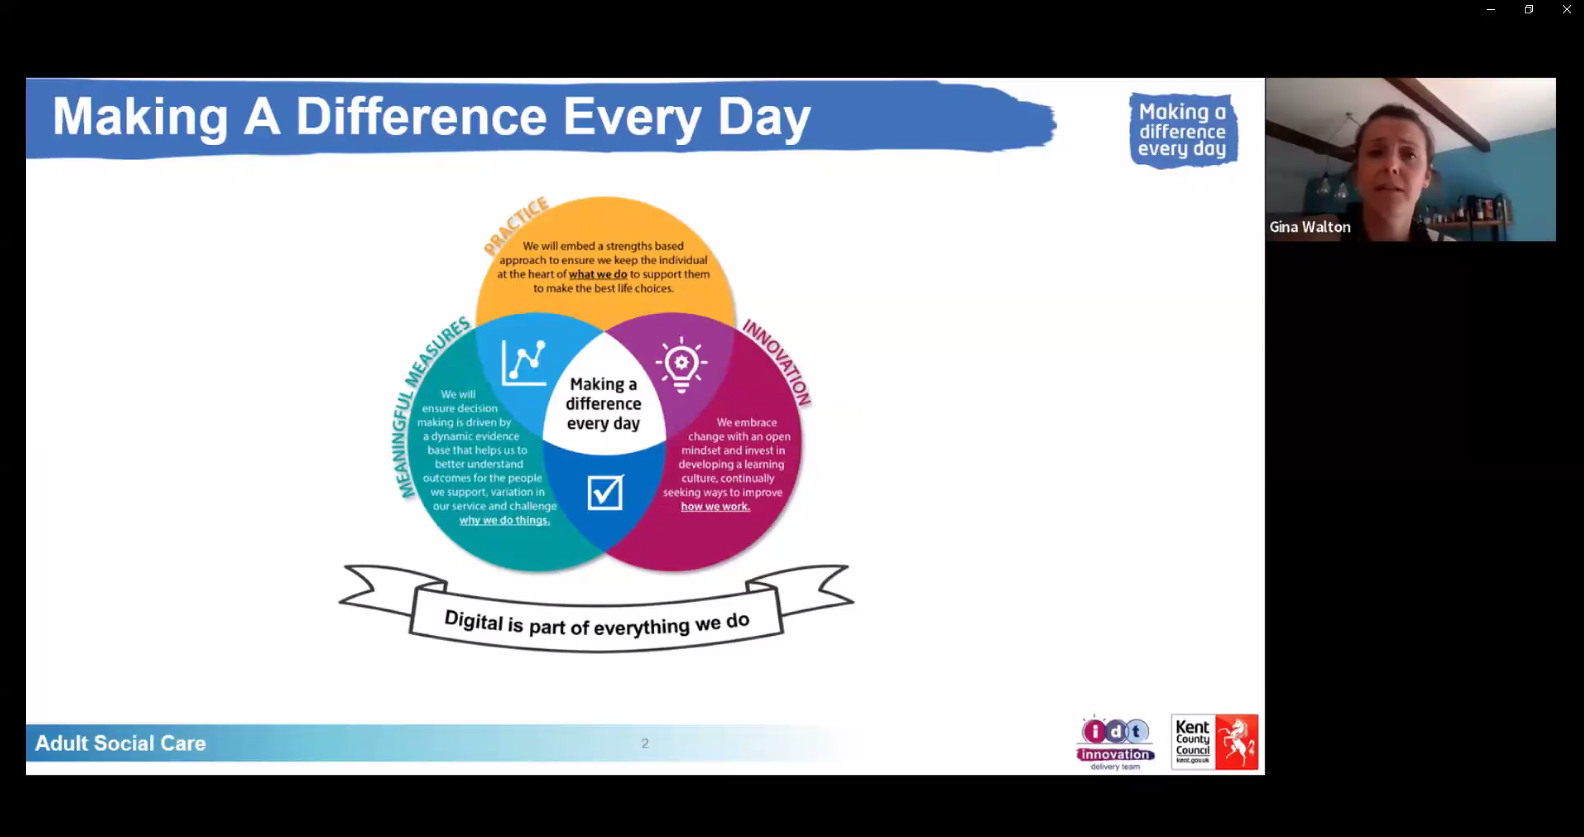 A slide from the presentation with a vendiagram titled “making a difference every day”